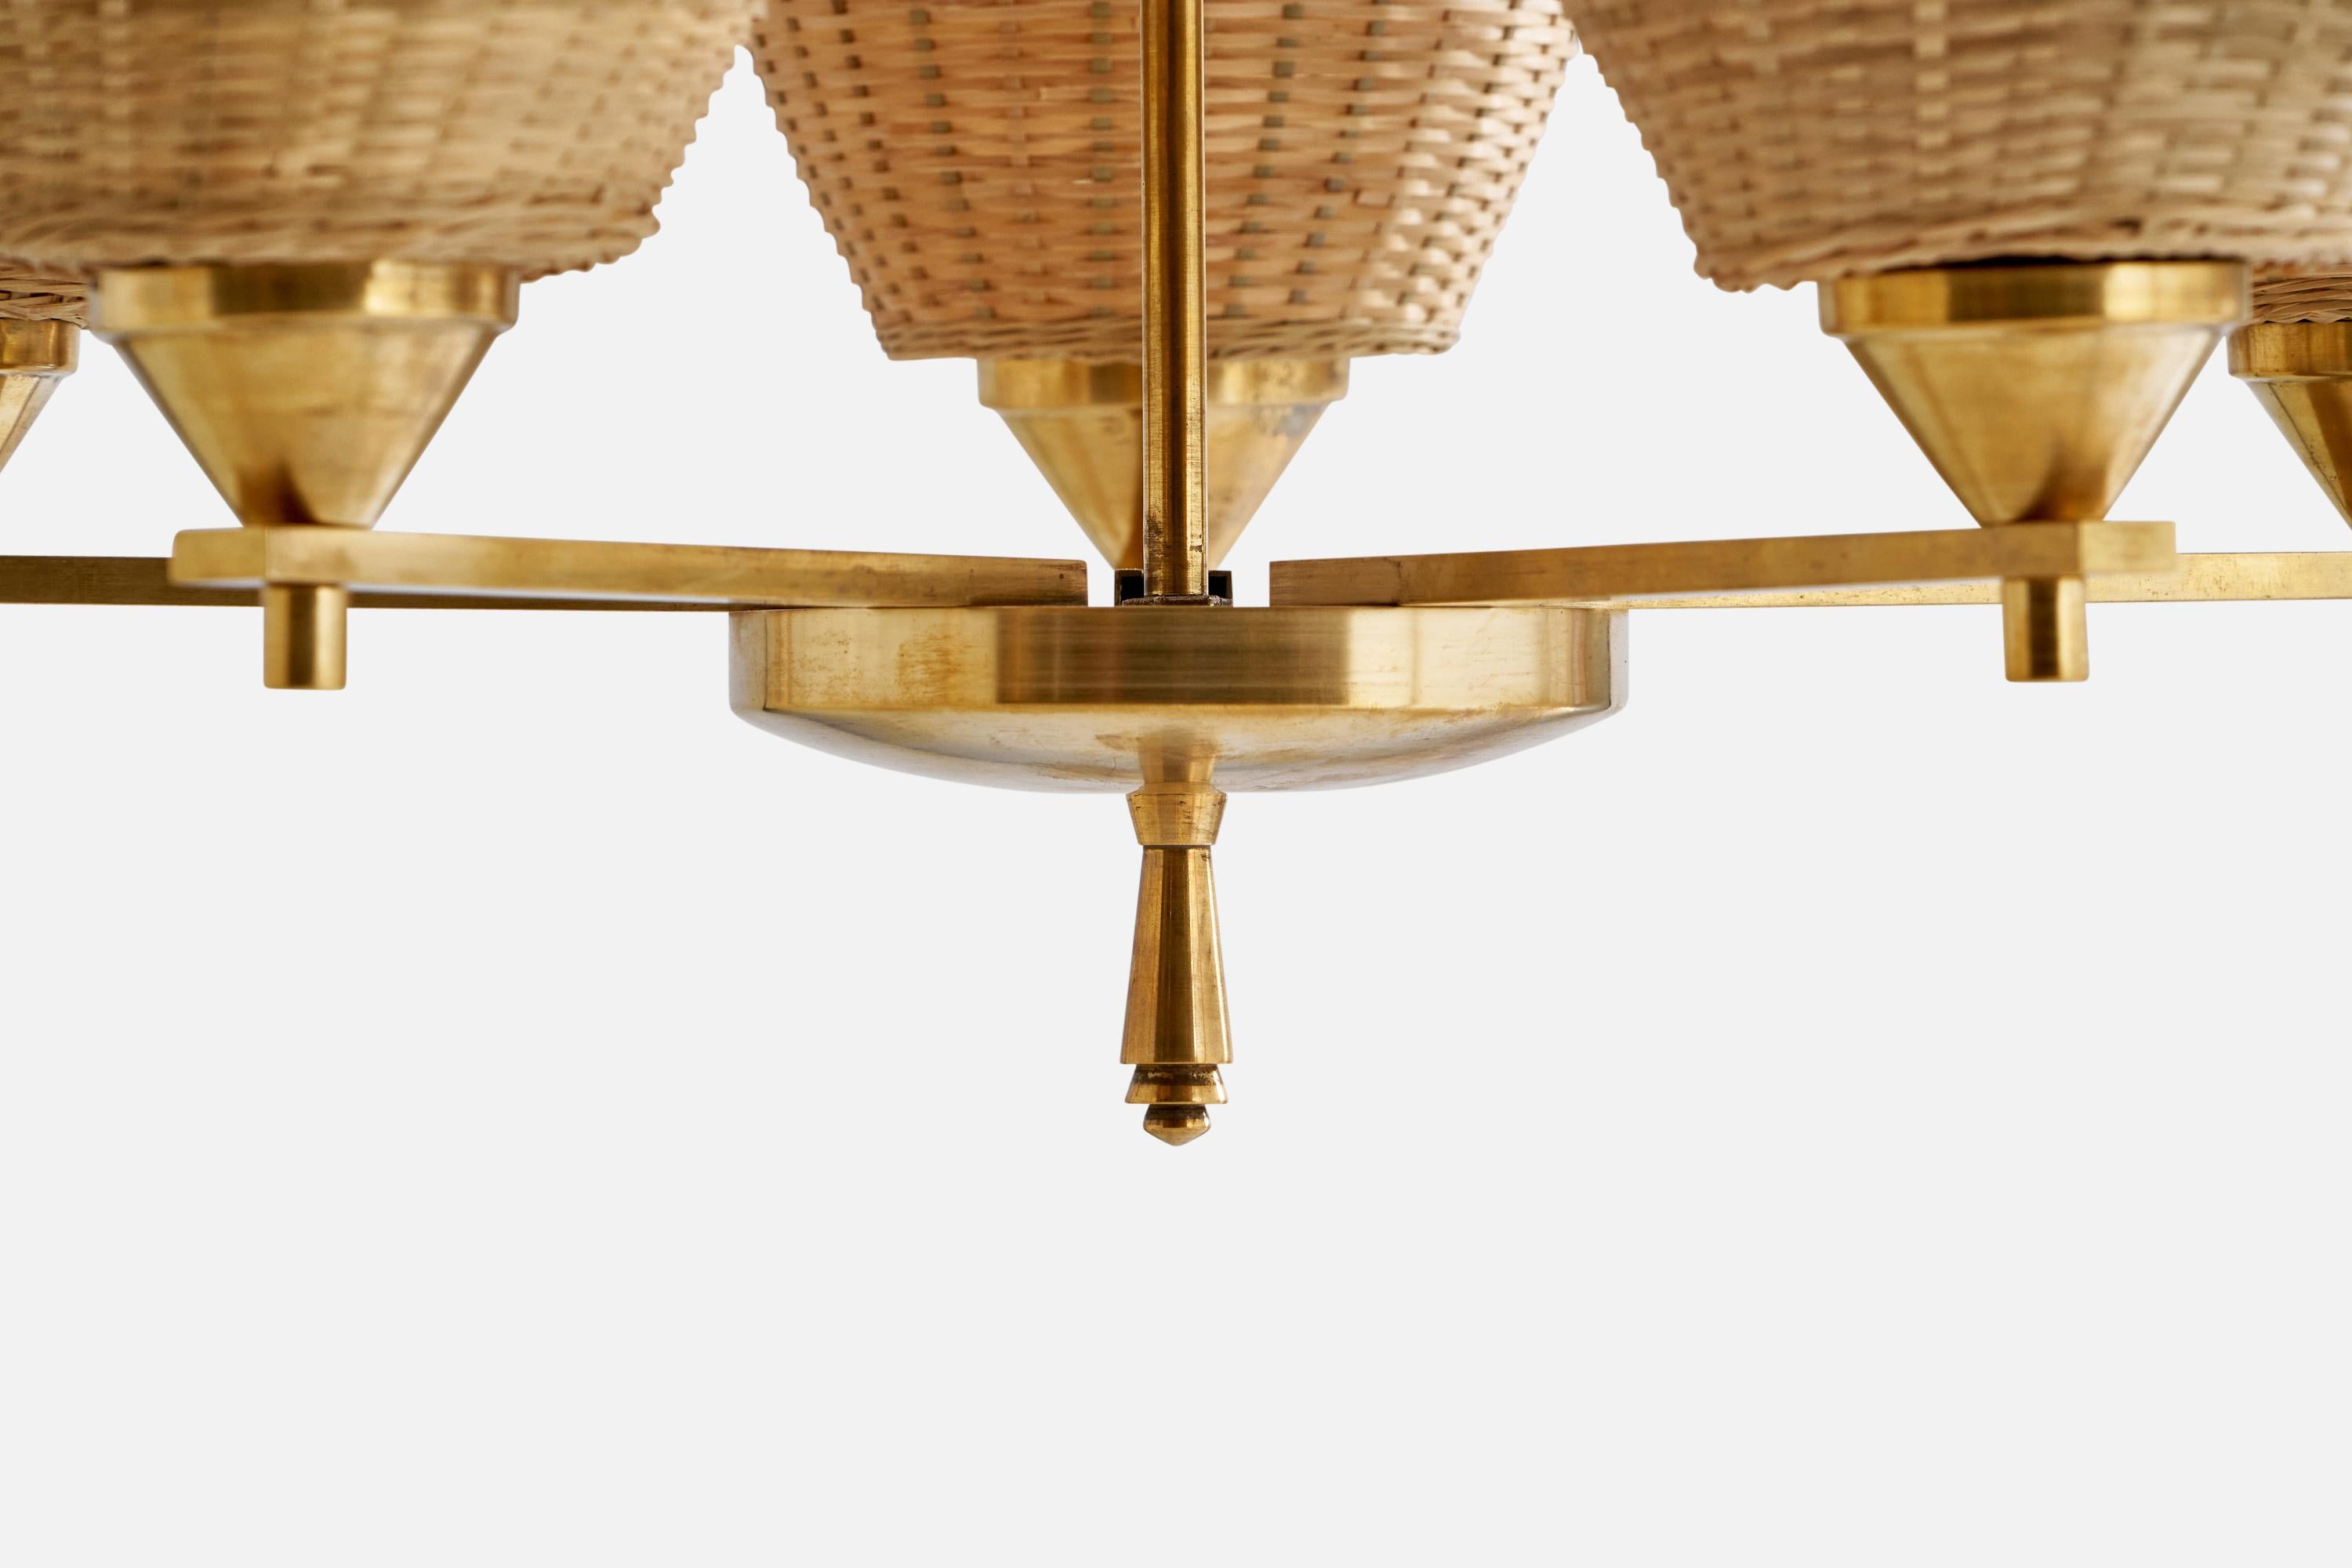 Finnish Paavo Tynell, Chandelier, Brass, Rattan, Finland, 1930s For Sale